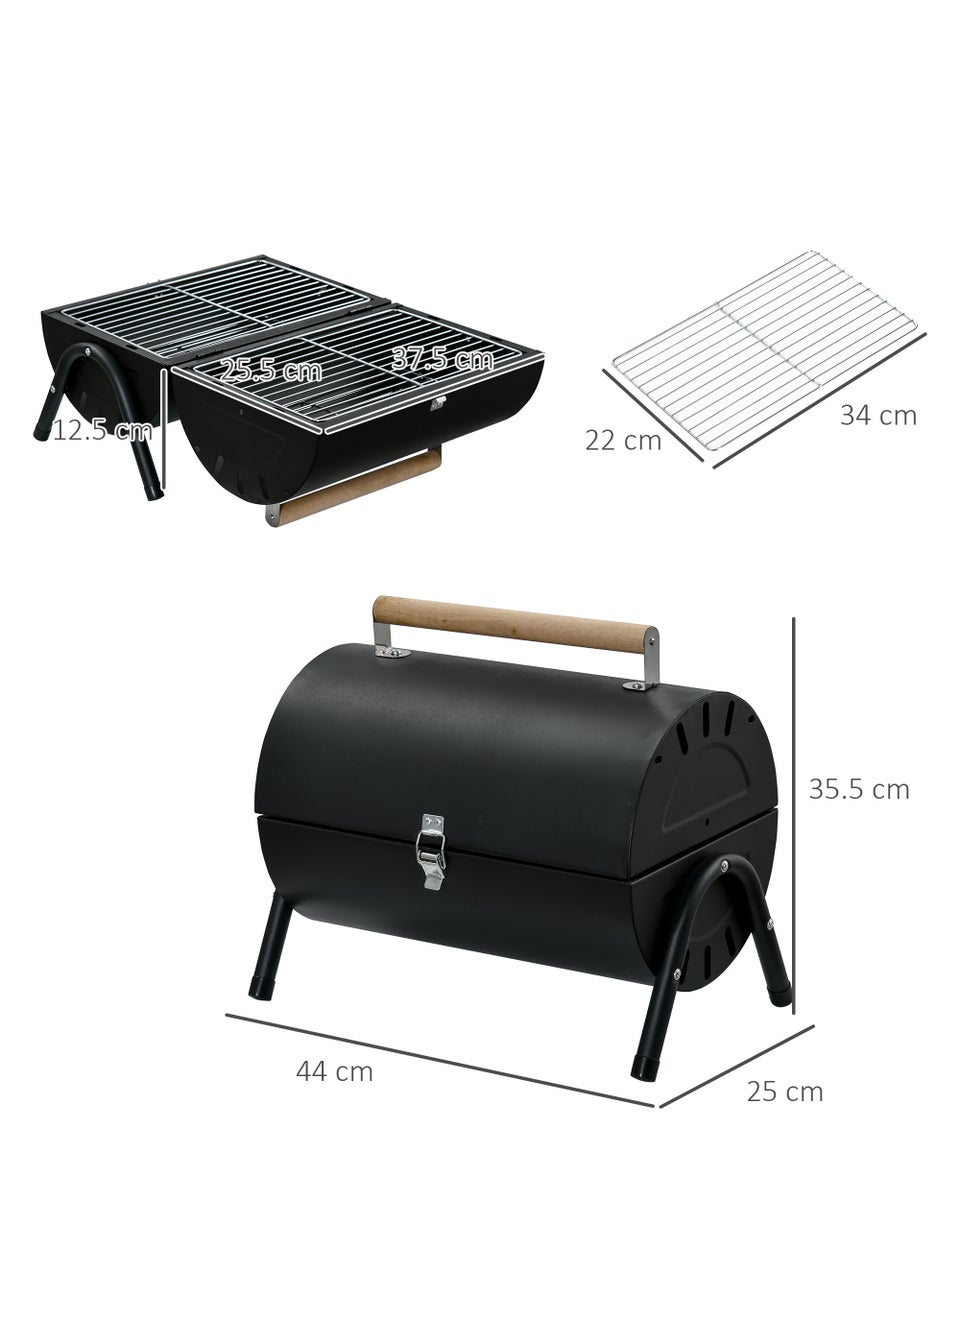 Outsunny Portable Double Sided Barbecue Grill (42cm x 26cm x 42cm)